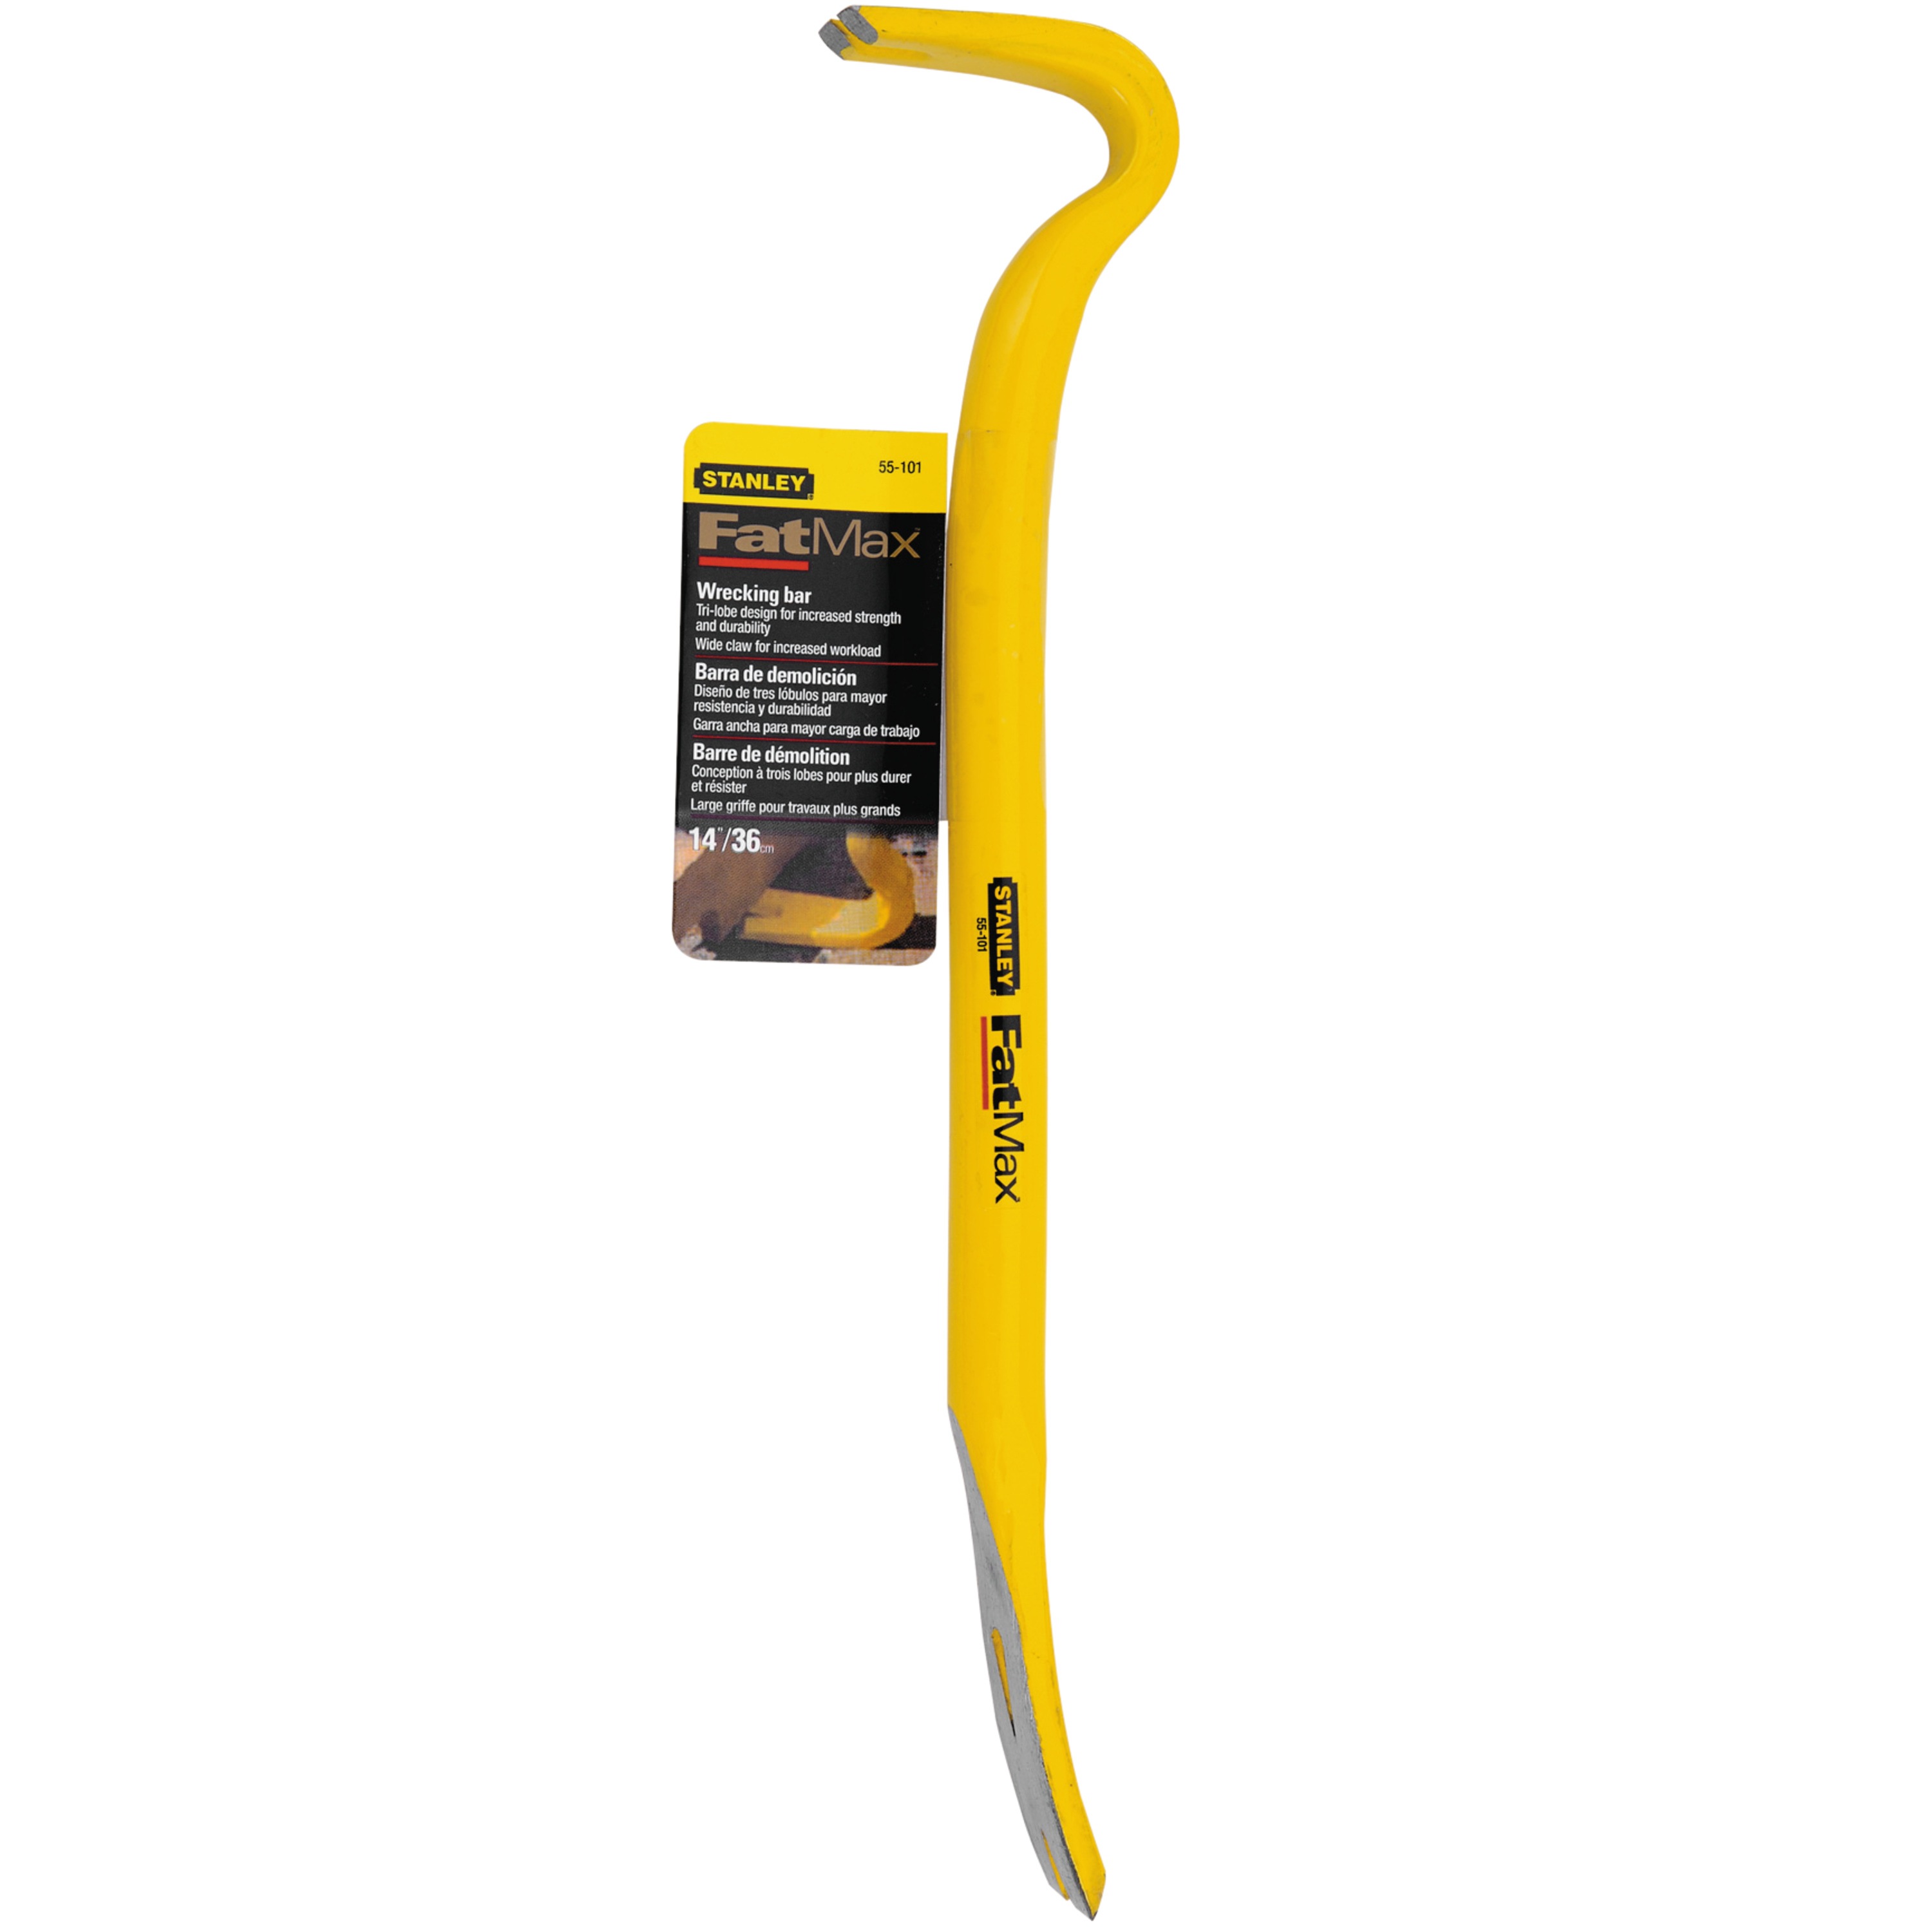 Stanley Tools - 14 in FATMAX Wrecking Bar - 55-101